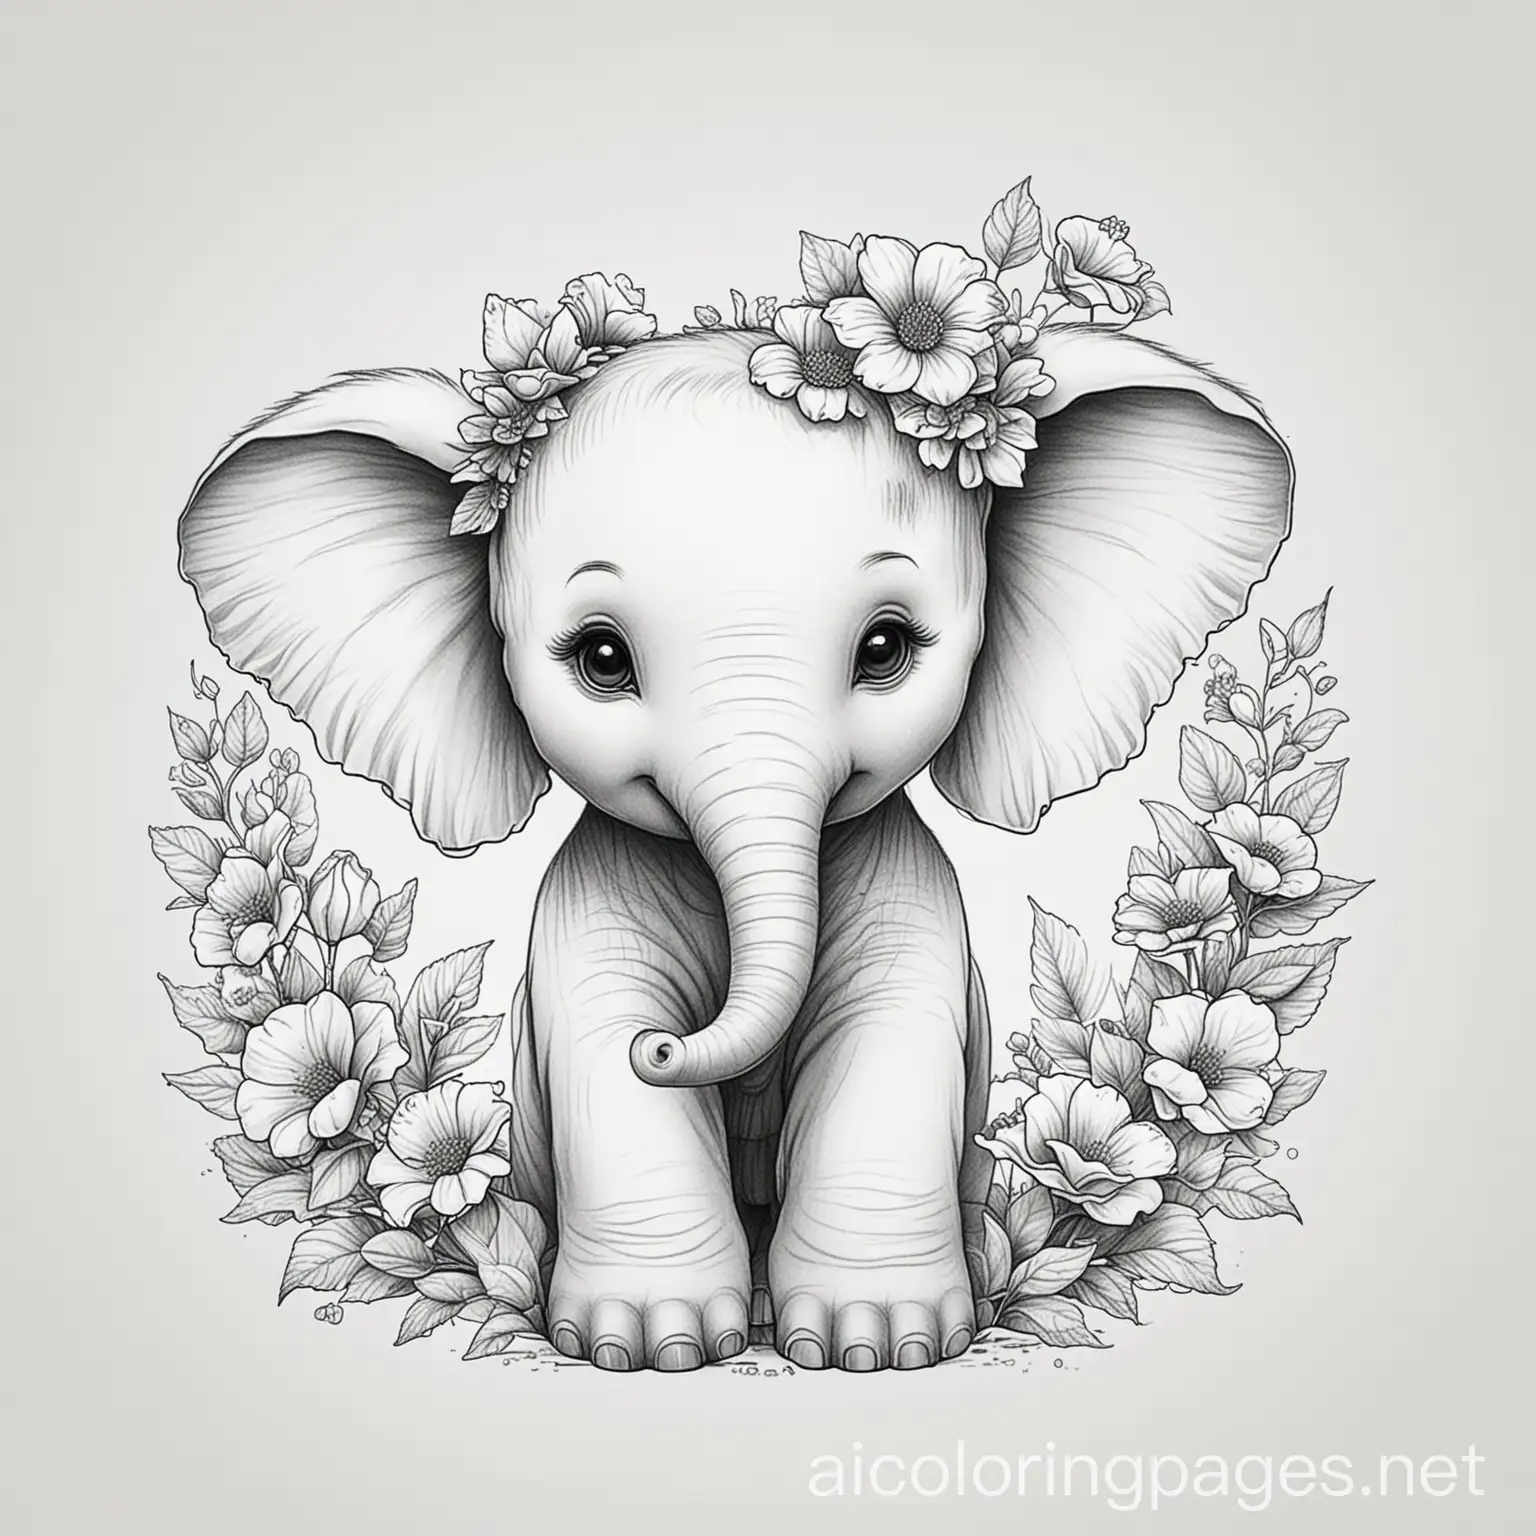 baby girl elephant with flowers for nursery, Coloring Page, black and white, line art, white background, Simplicity, Ample White Space. The background of the coloring page is plain white to make it easy for young children to color within the lines. The outlines of all the subjects are easy to distinguish, making it simple for kids to color without too much difficulty